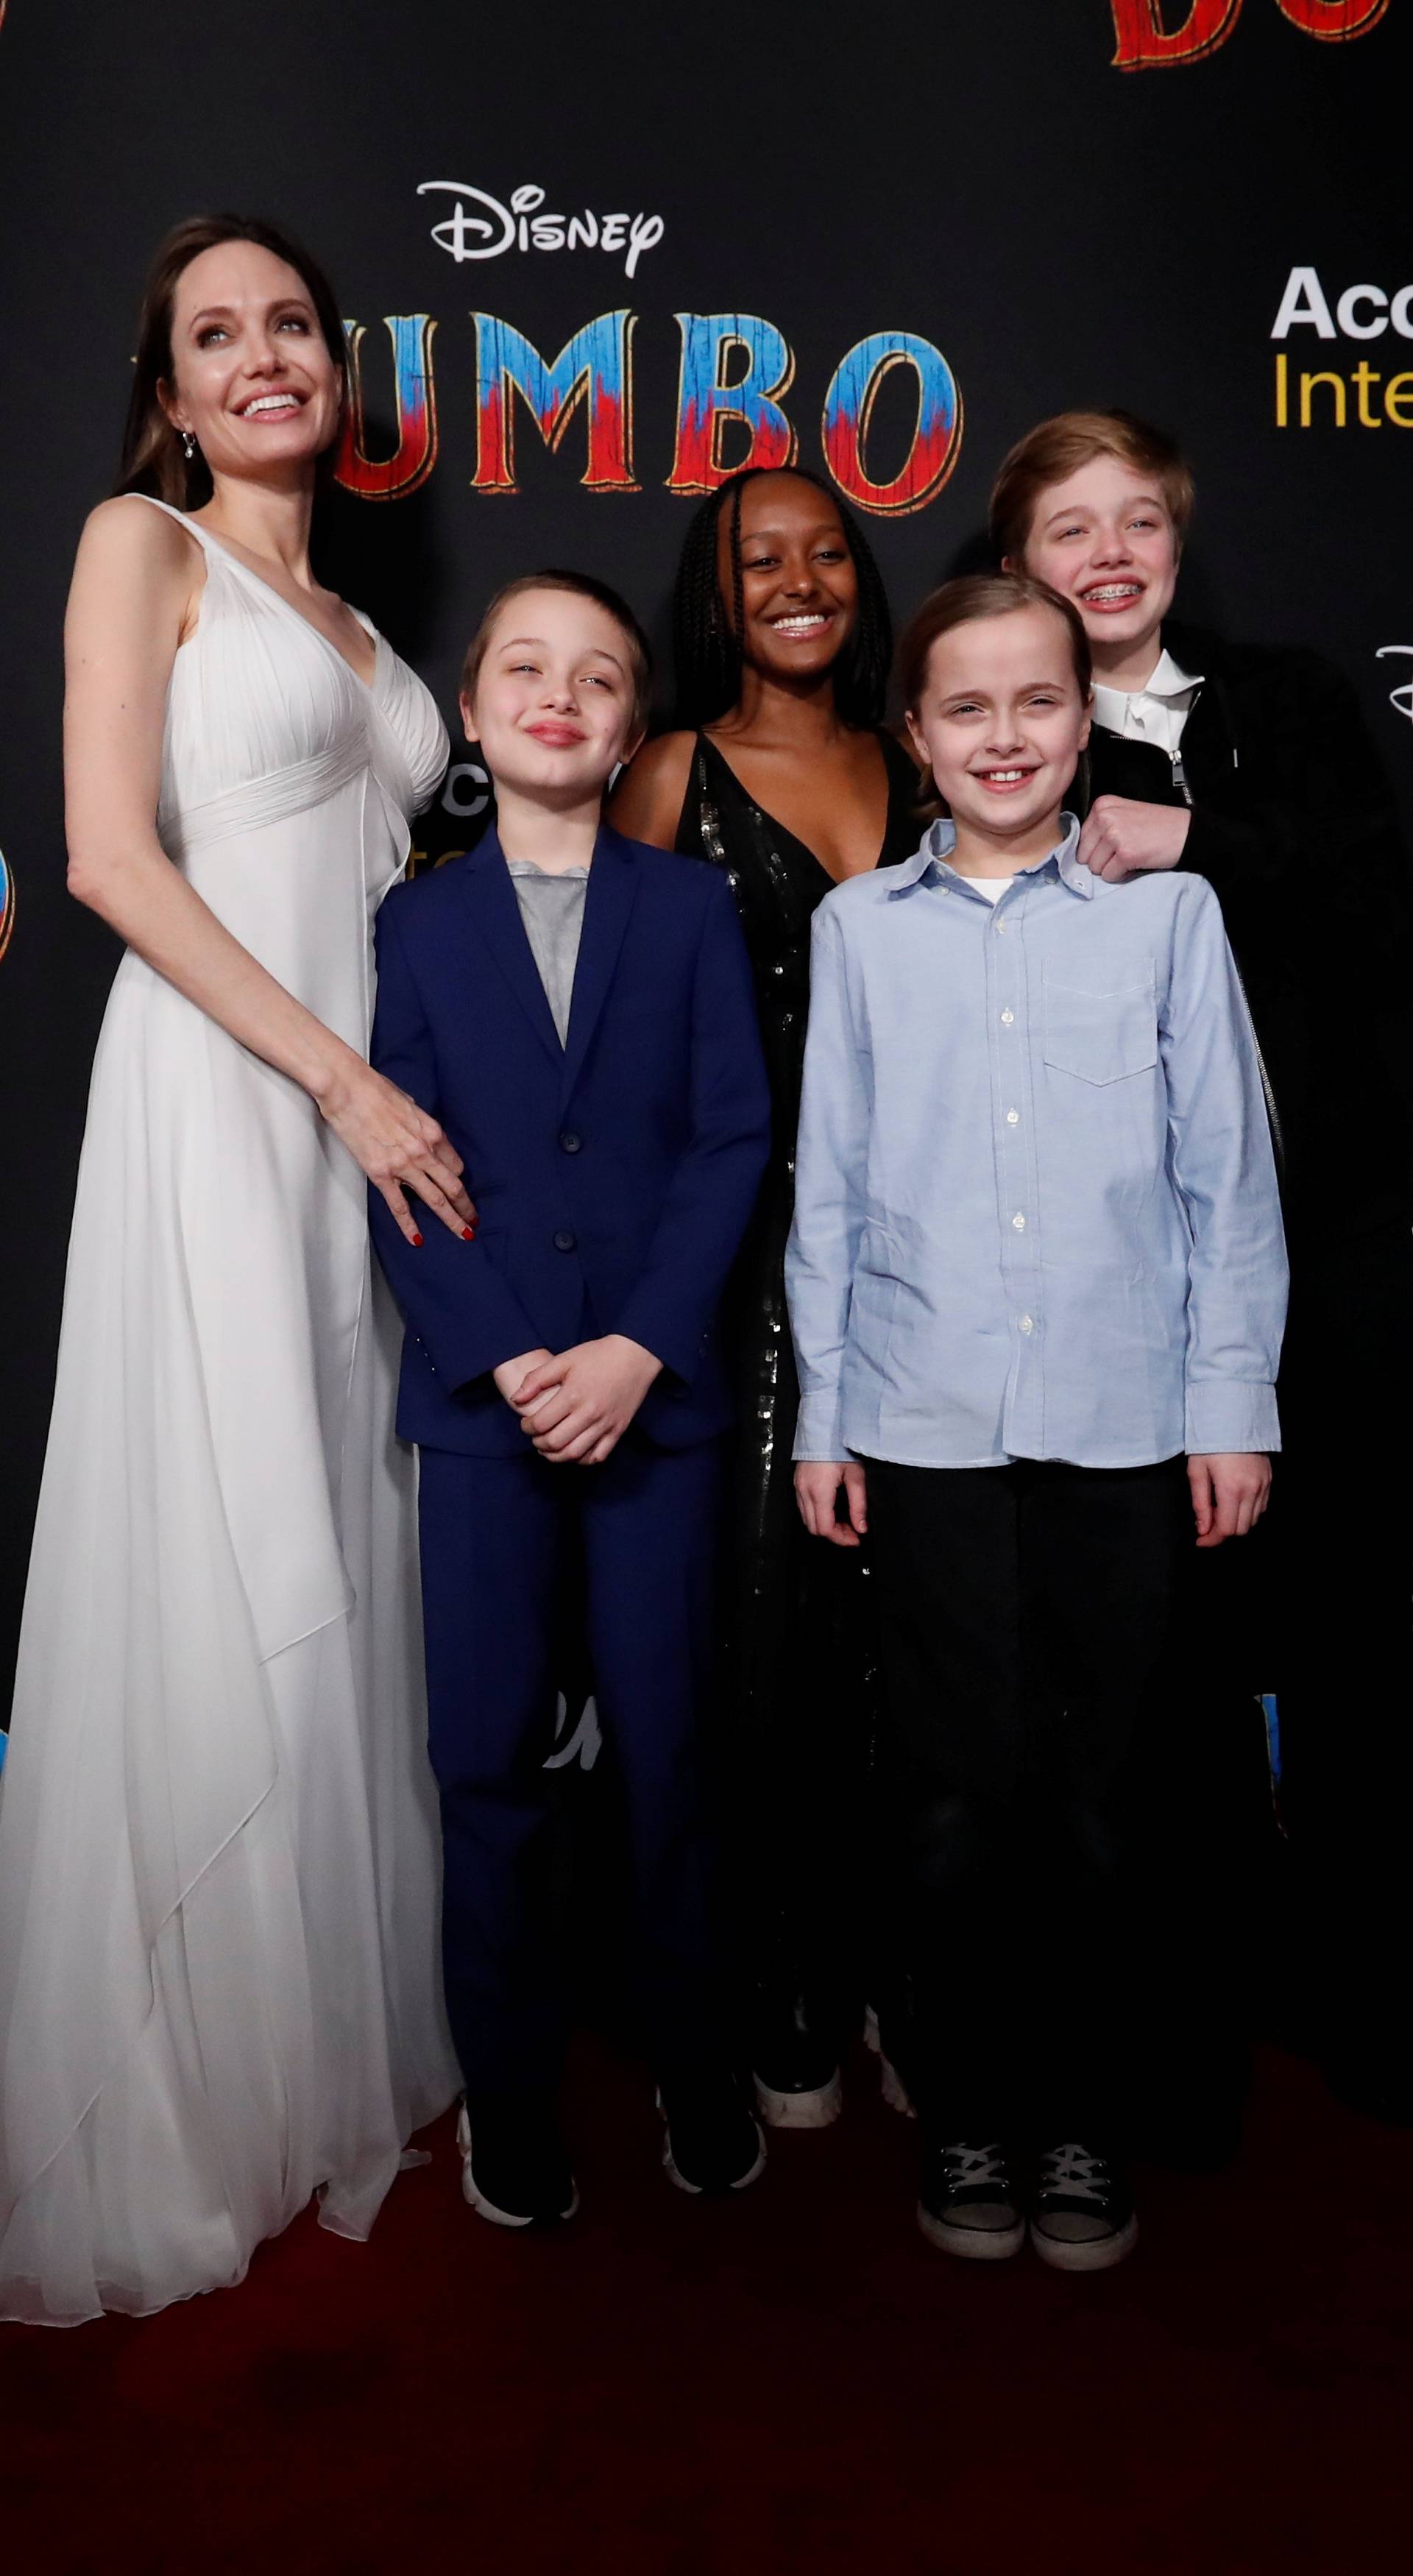 Angelina Jolie pose with her children at the premiere for the movie "Dumbo" in Los Angeles